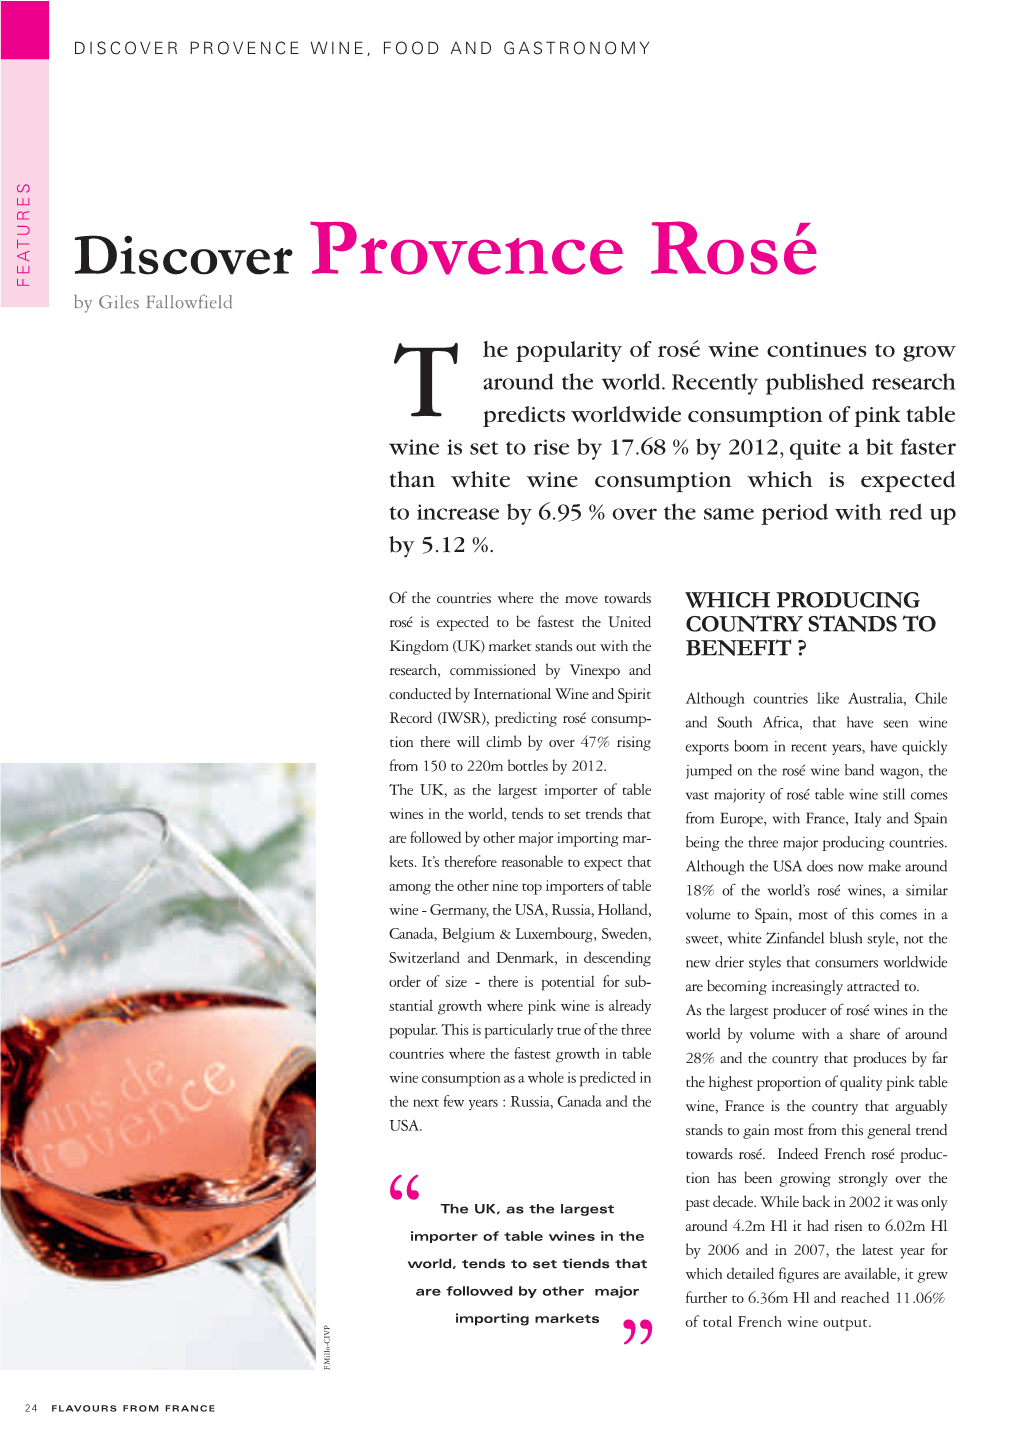 Discover Provence Rosé FEATURES by Giles Fallowfield